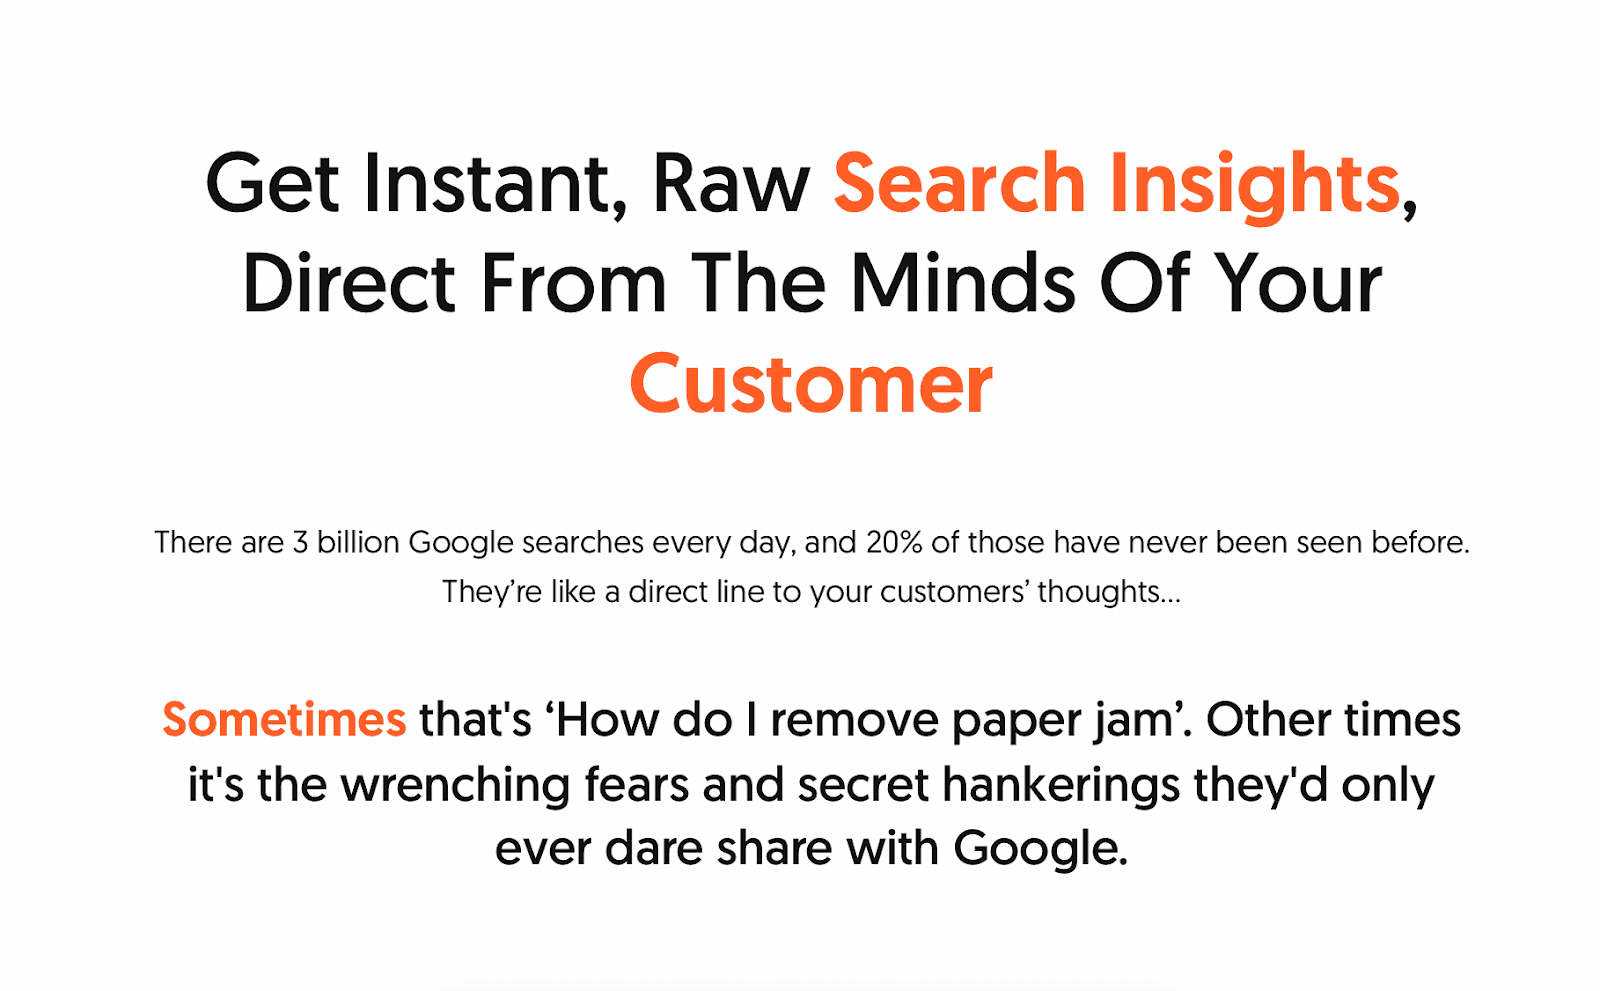 Get Instant, Raw Search Insights, Direct From The Minds Of Your Customer